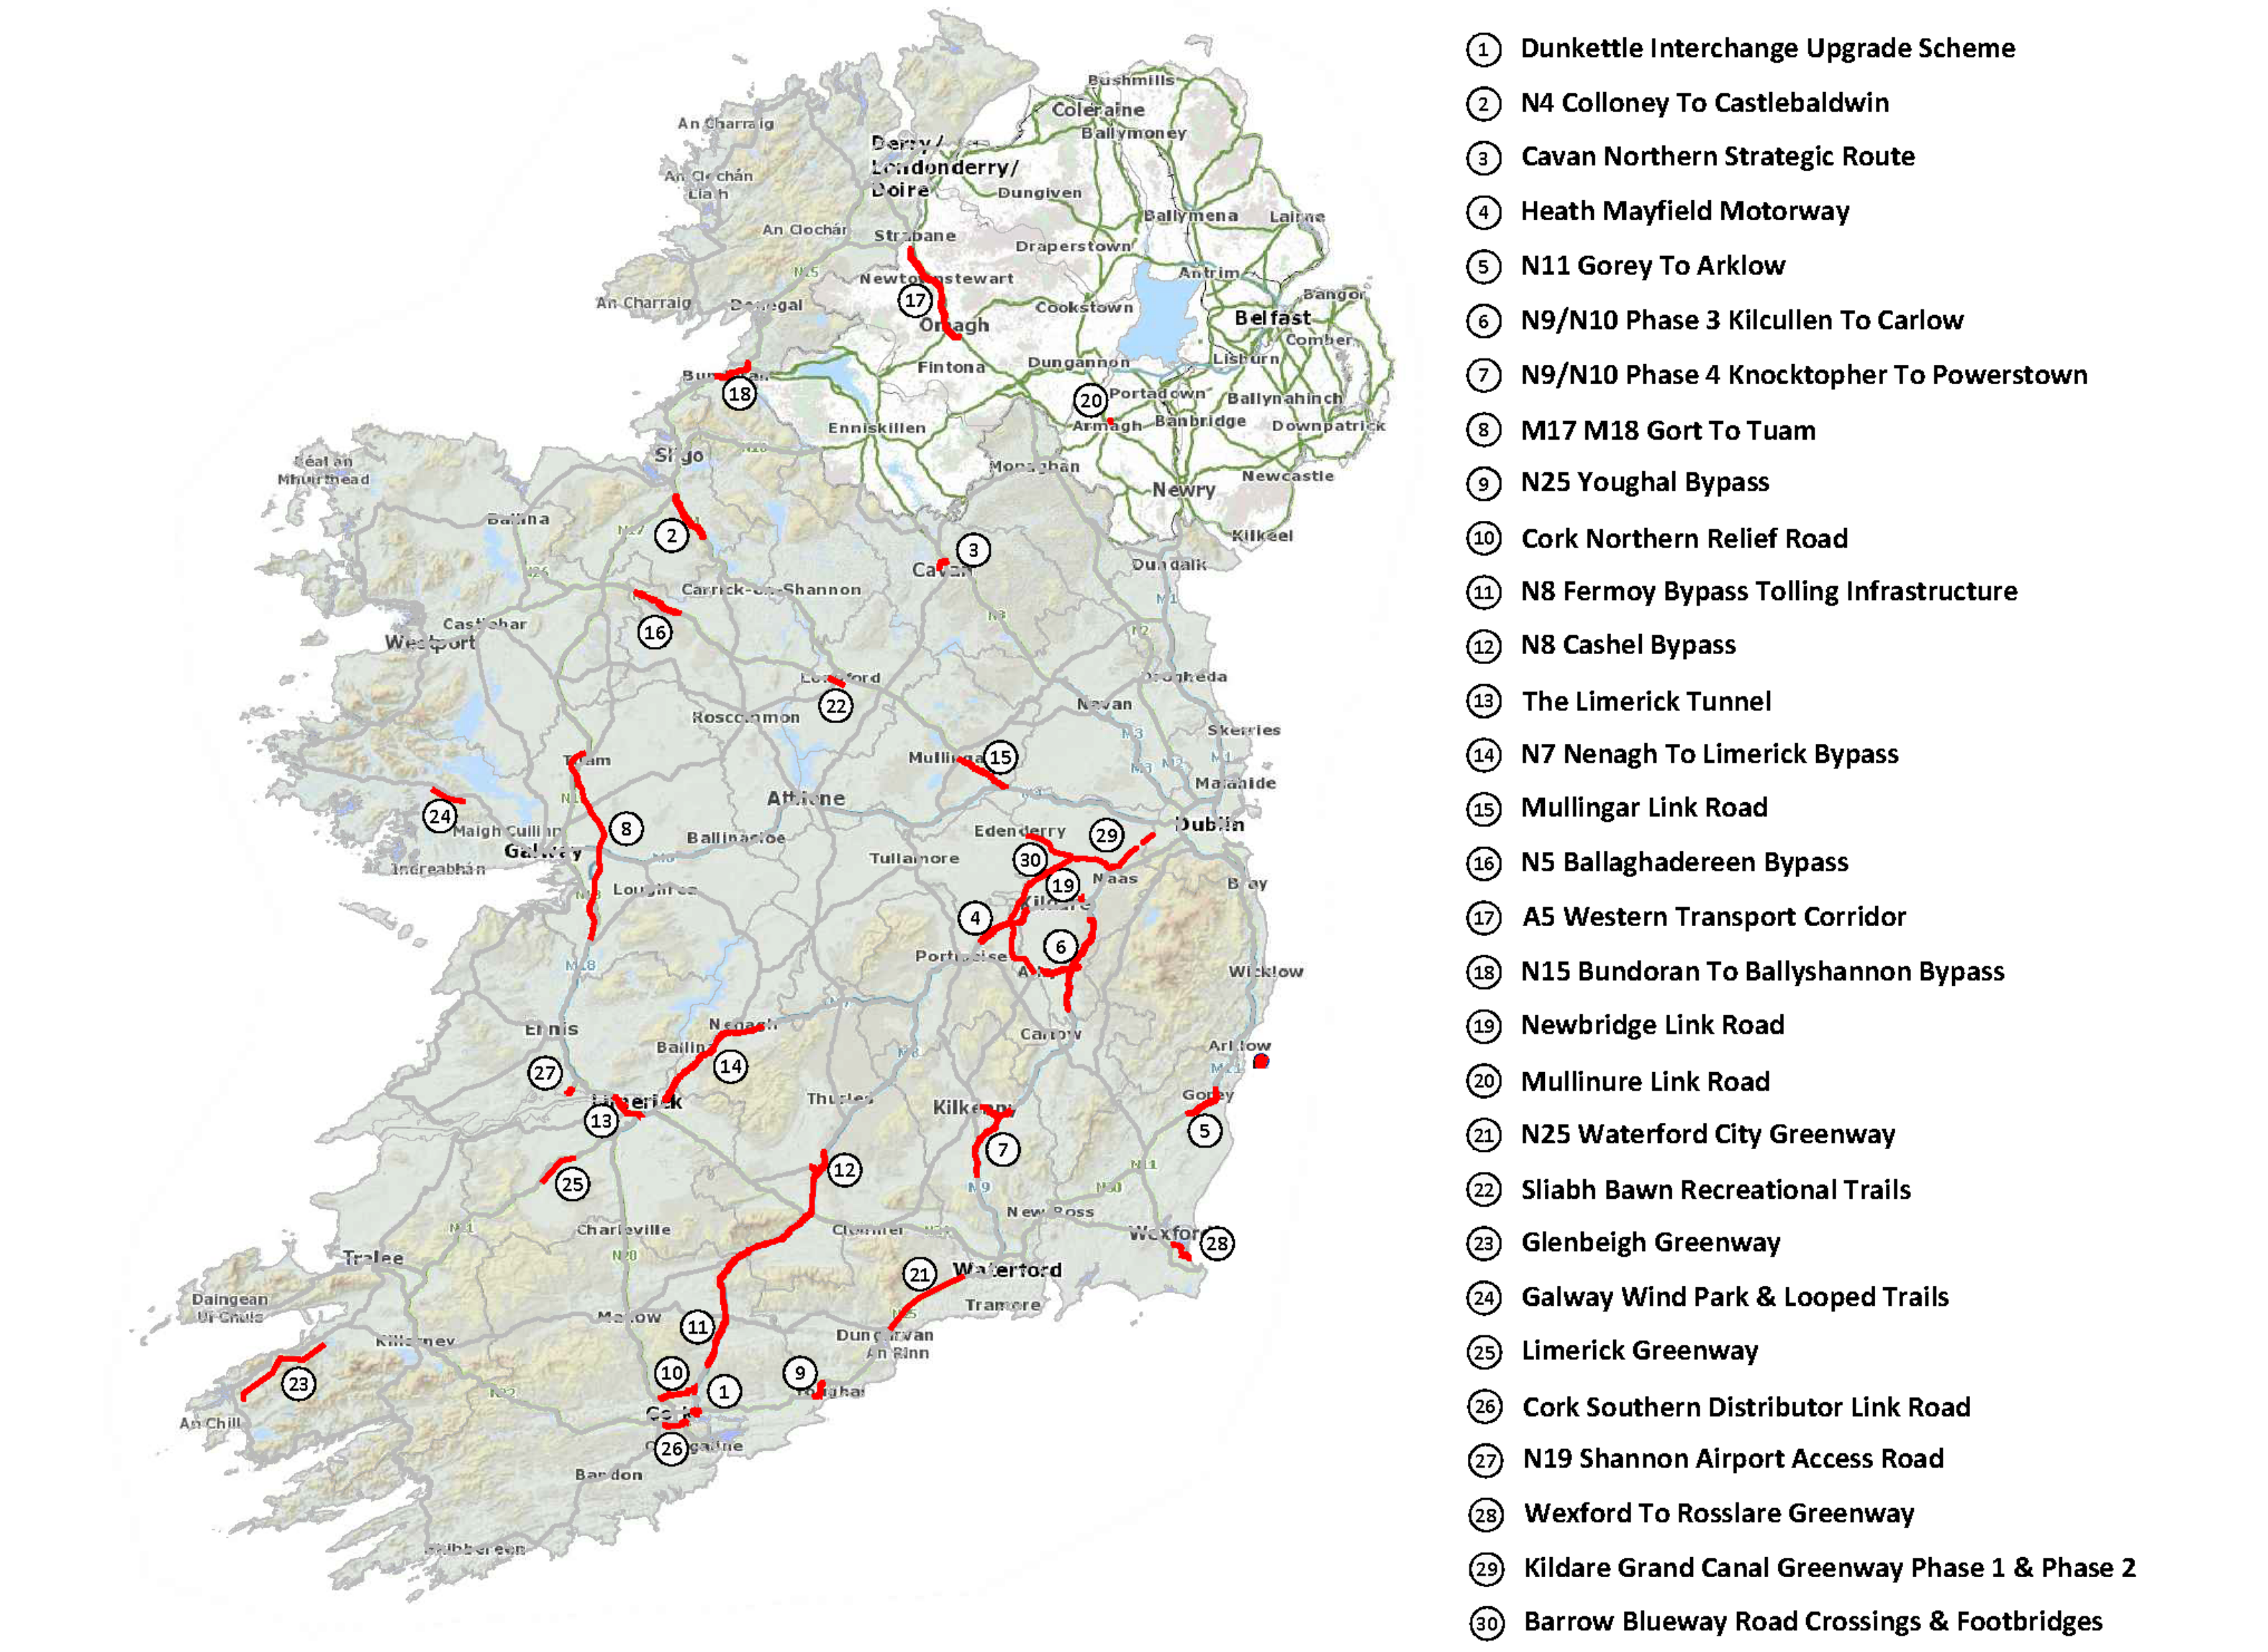 Image of map of Ireland road, highway, greenway and blue projects